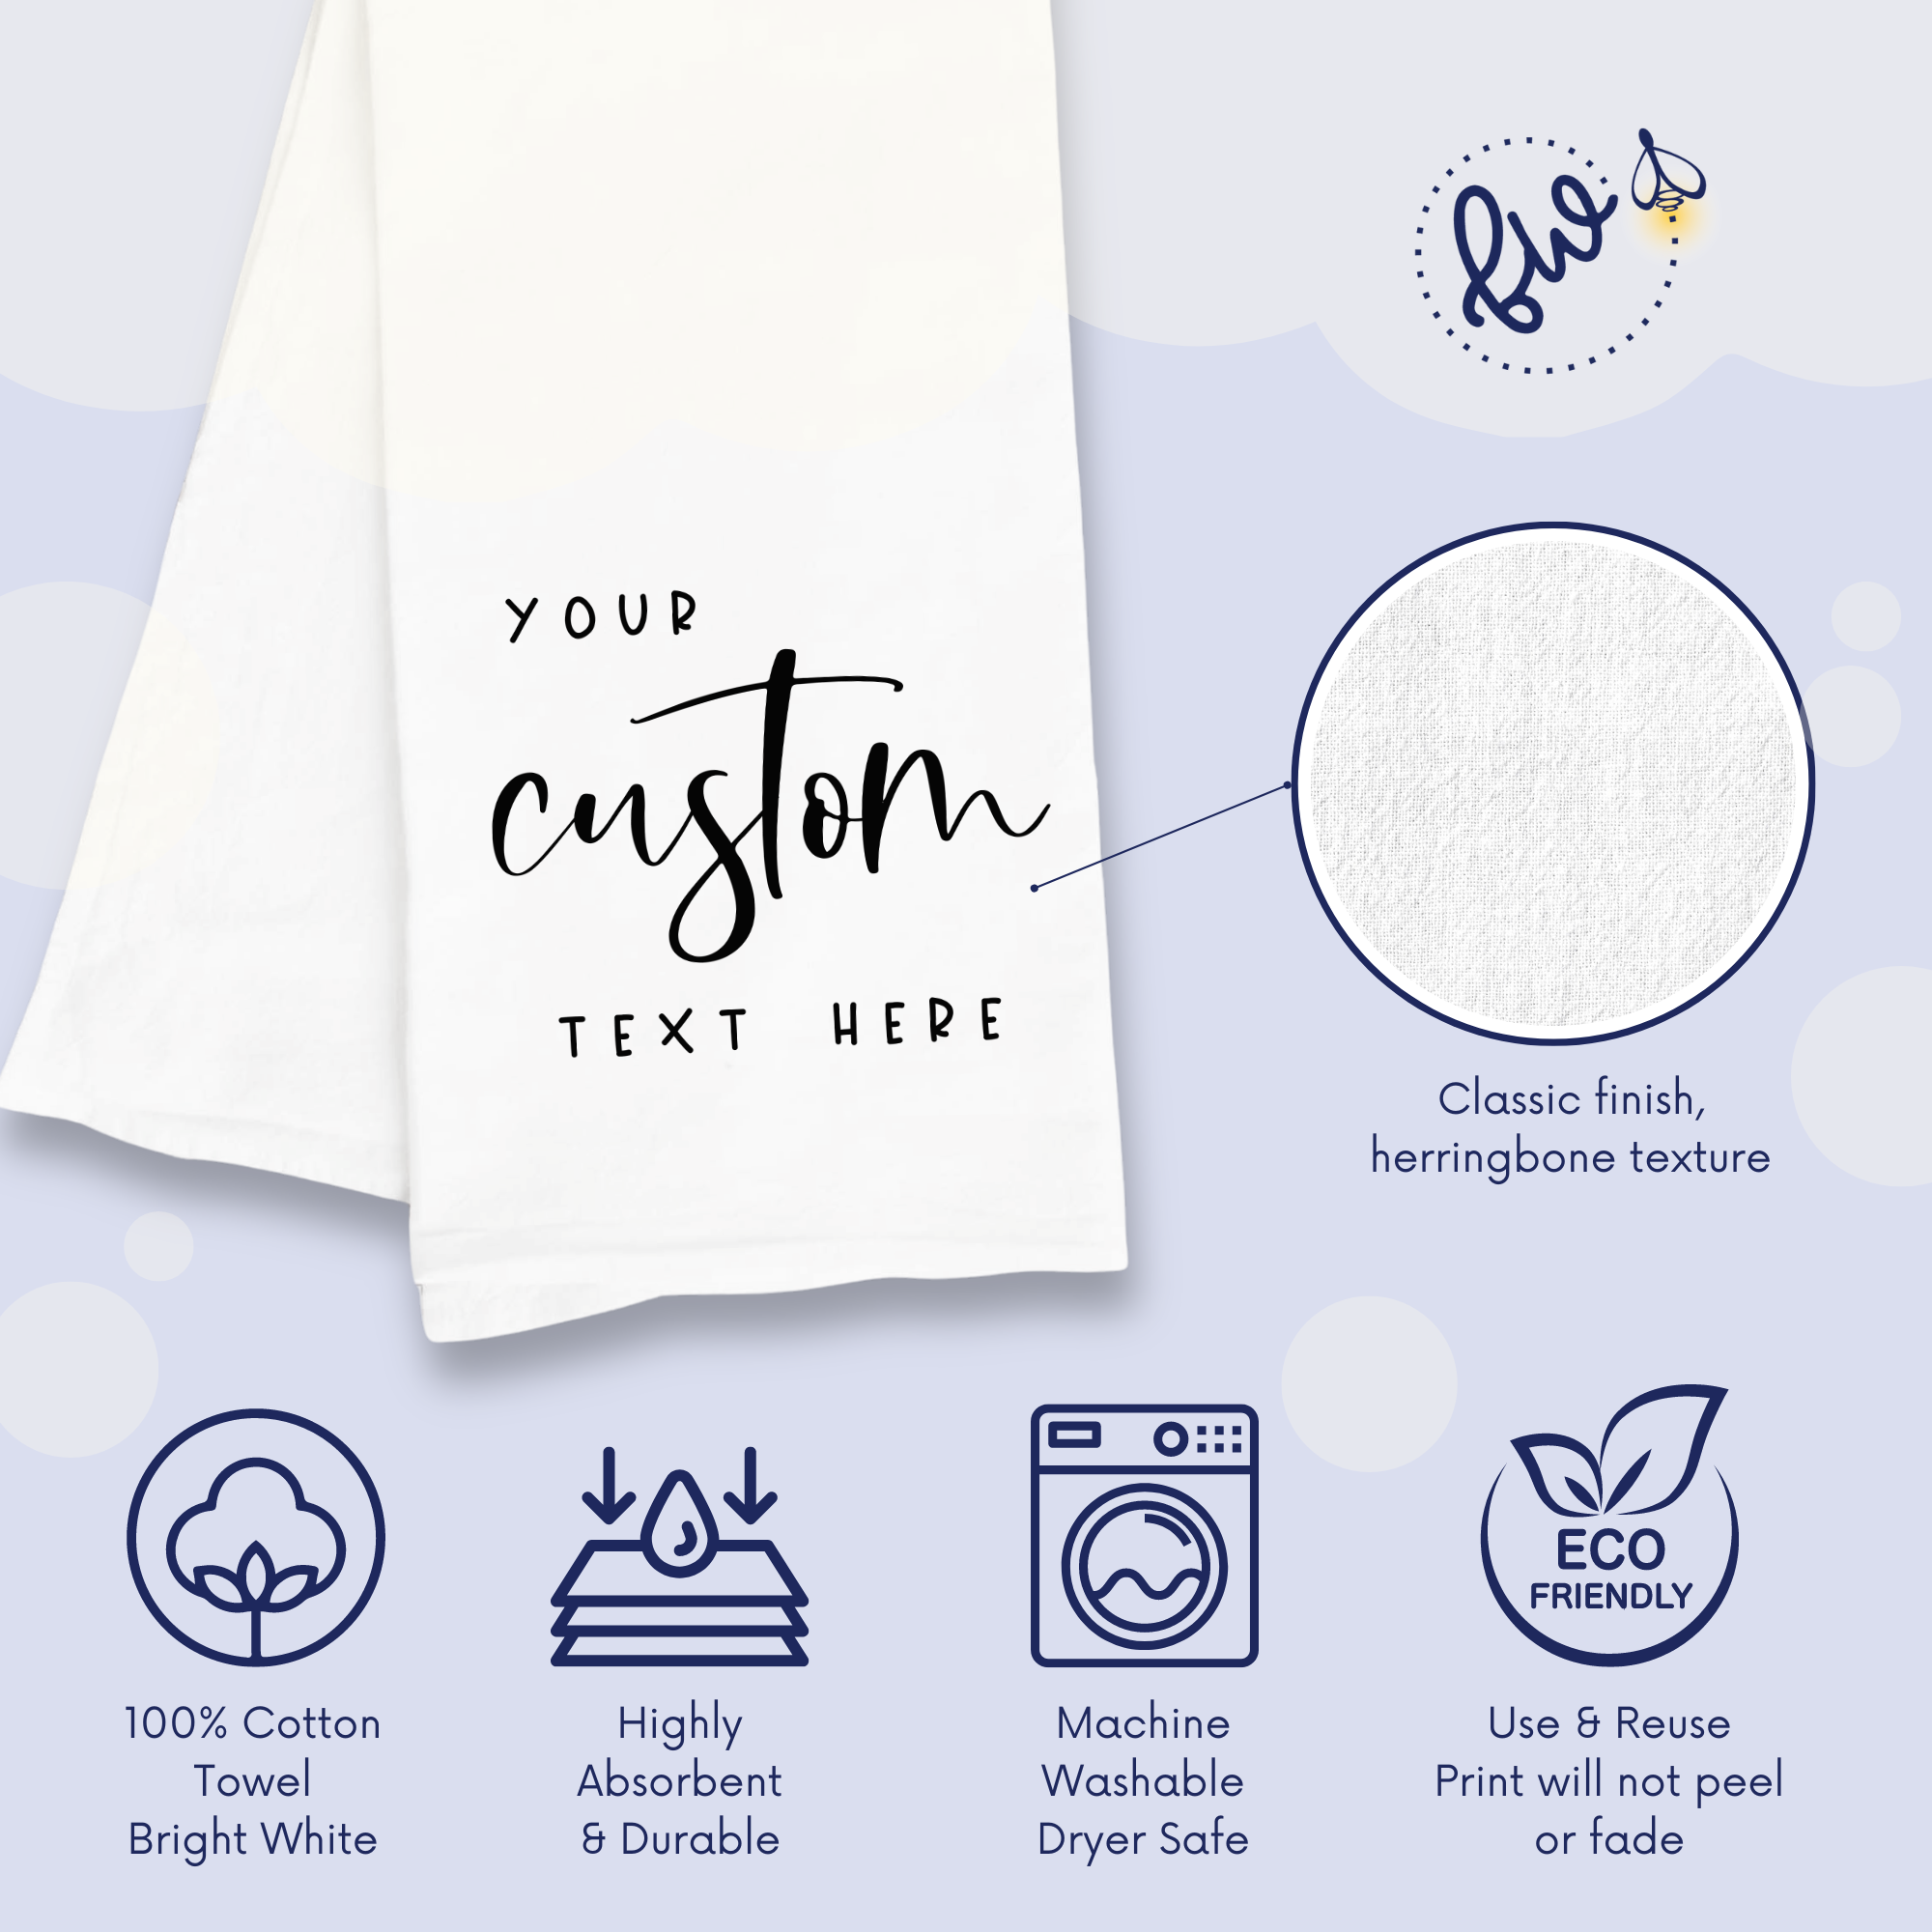 Custom Design Kitchen Towel - Create Your Own Design - Your Text Here